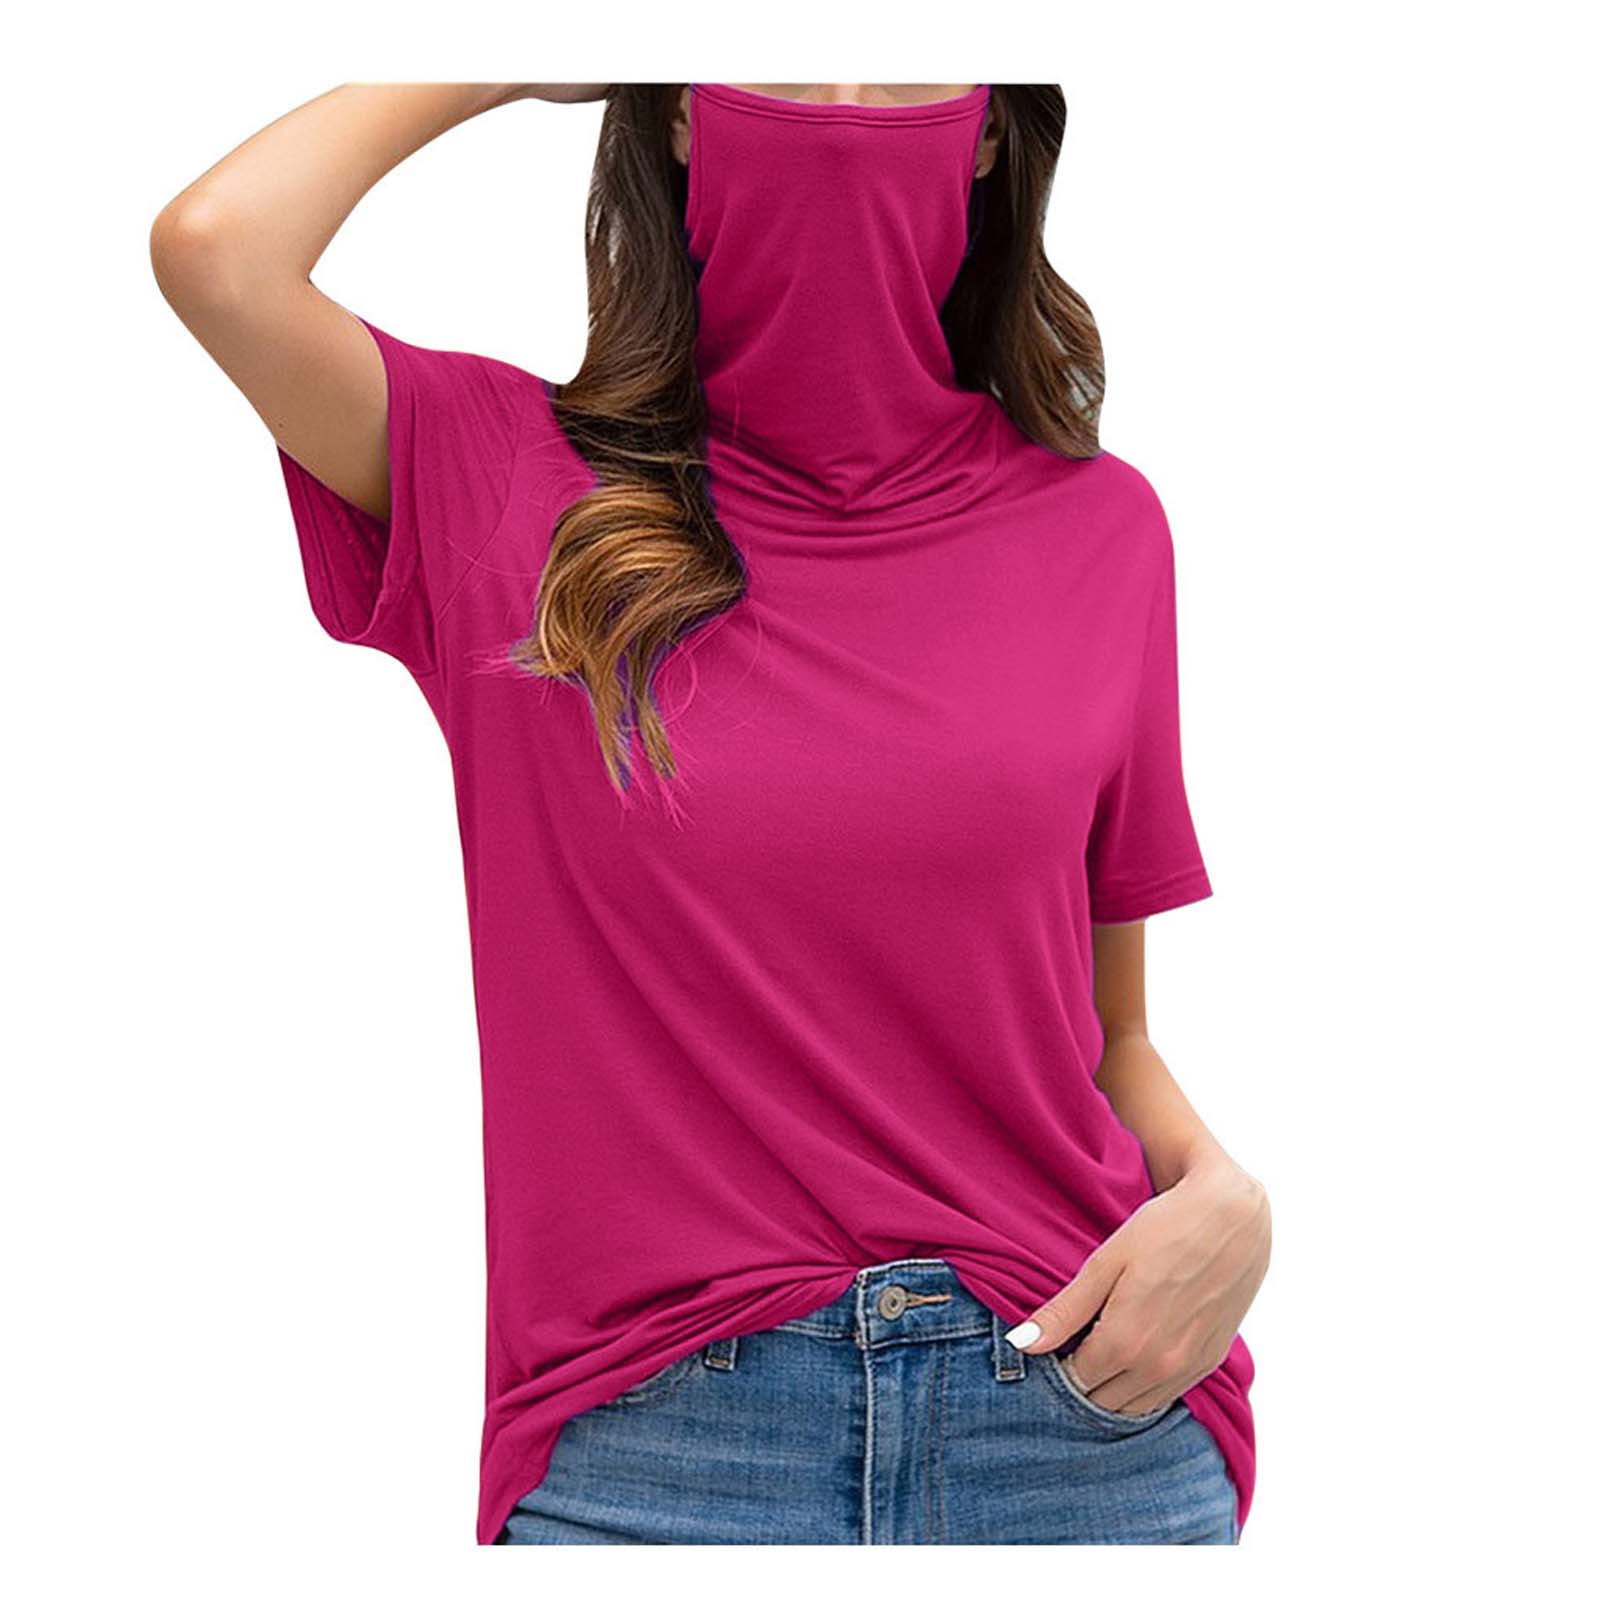 SHOBBW Womens Casual T-Shirt with Face Mask Short Sleeve Solid Color Turtleneck Plus Size Loose Top Blouse 